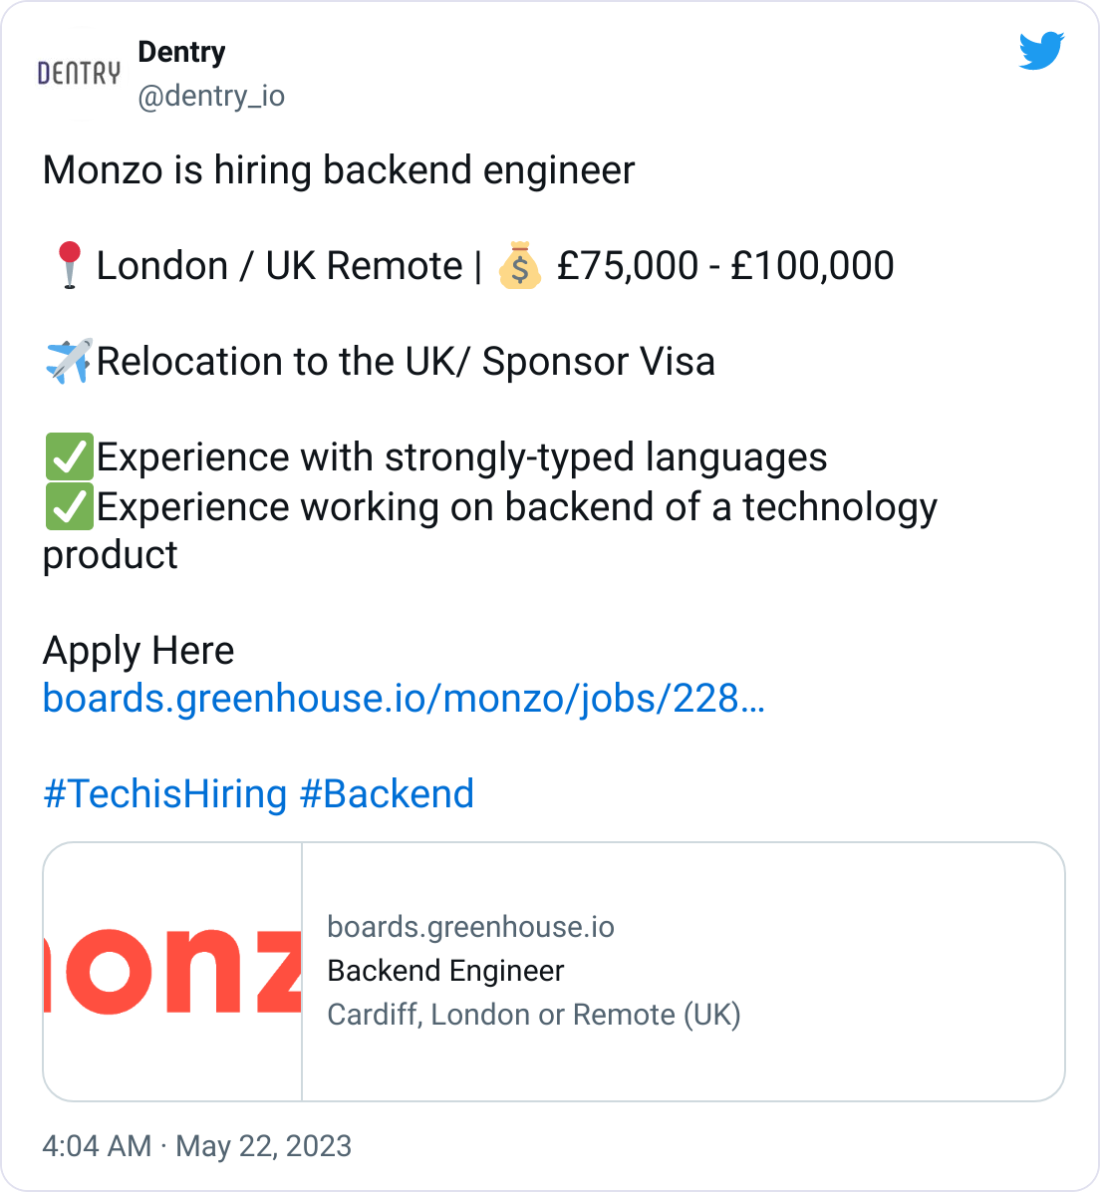 Dentry @dentry_io Monzo is hiring backend engineer  📍London / UK Remote | 💰 £75,000 - £100,000   ✈️Relocation to the UK/ Sponsor Visa   ✅Experience with strongly-typed languages ✅Experience working on backend of a technology product  Apply Here https://boards.greenhouse.io/monzo/jobs/2282245?utm_campaign=dentry-by-Hackmamba&utm_medium=dentry-twitter&utm_source=dentry  #TechisHiring #Backend